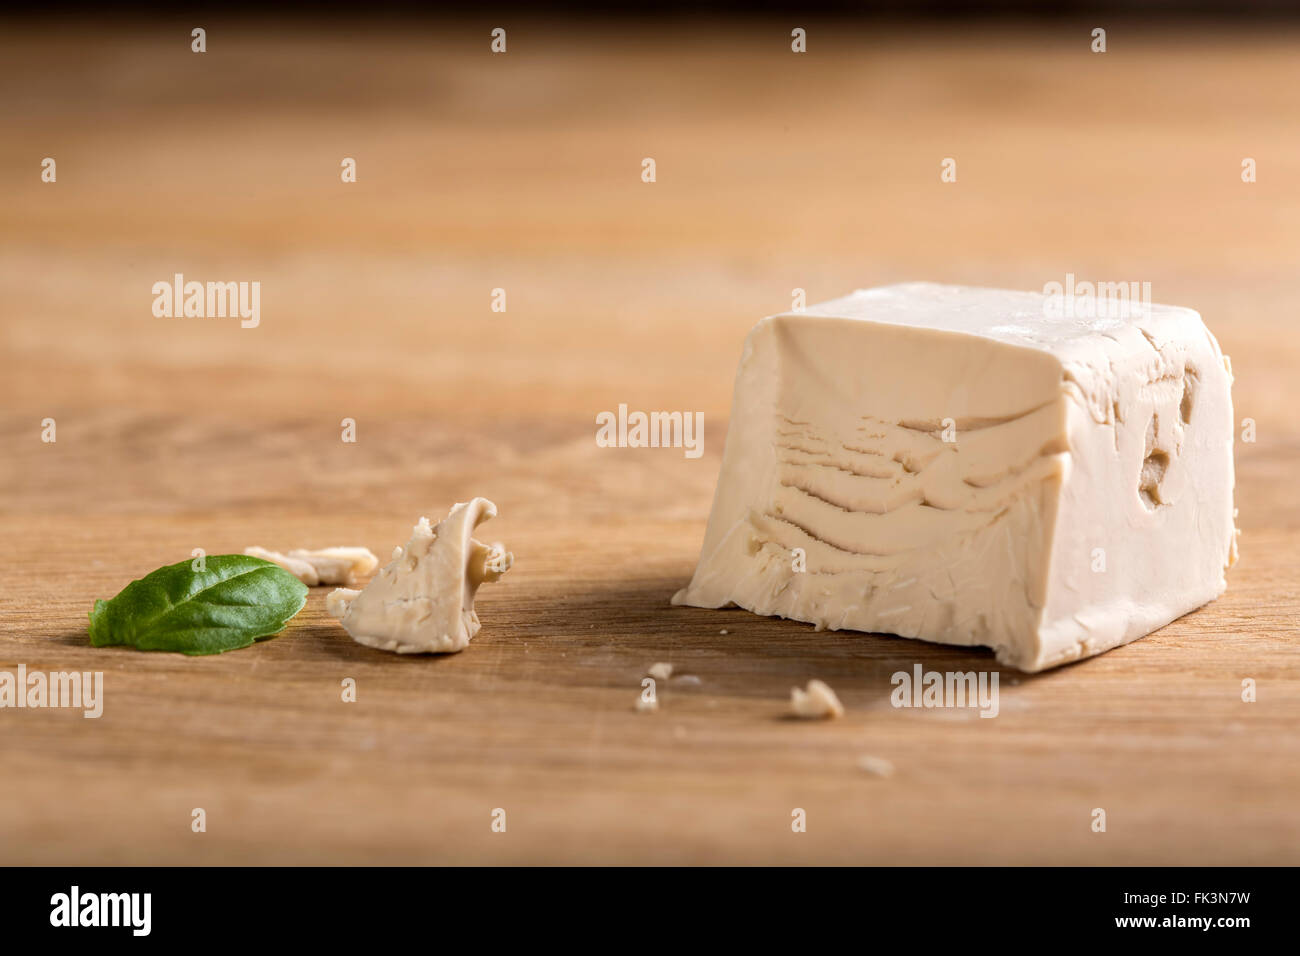 Crumbled yeast cube on a wooden board Stock Photo